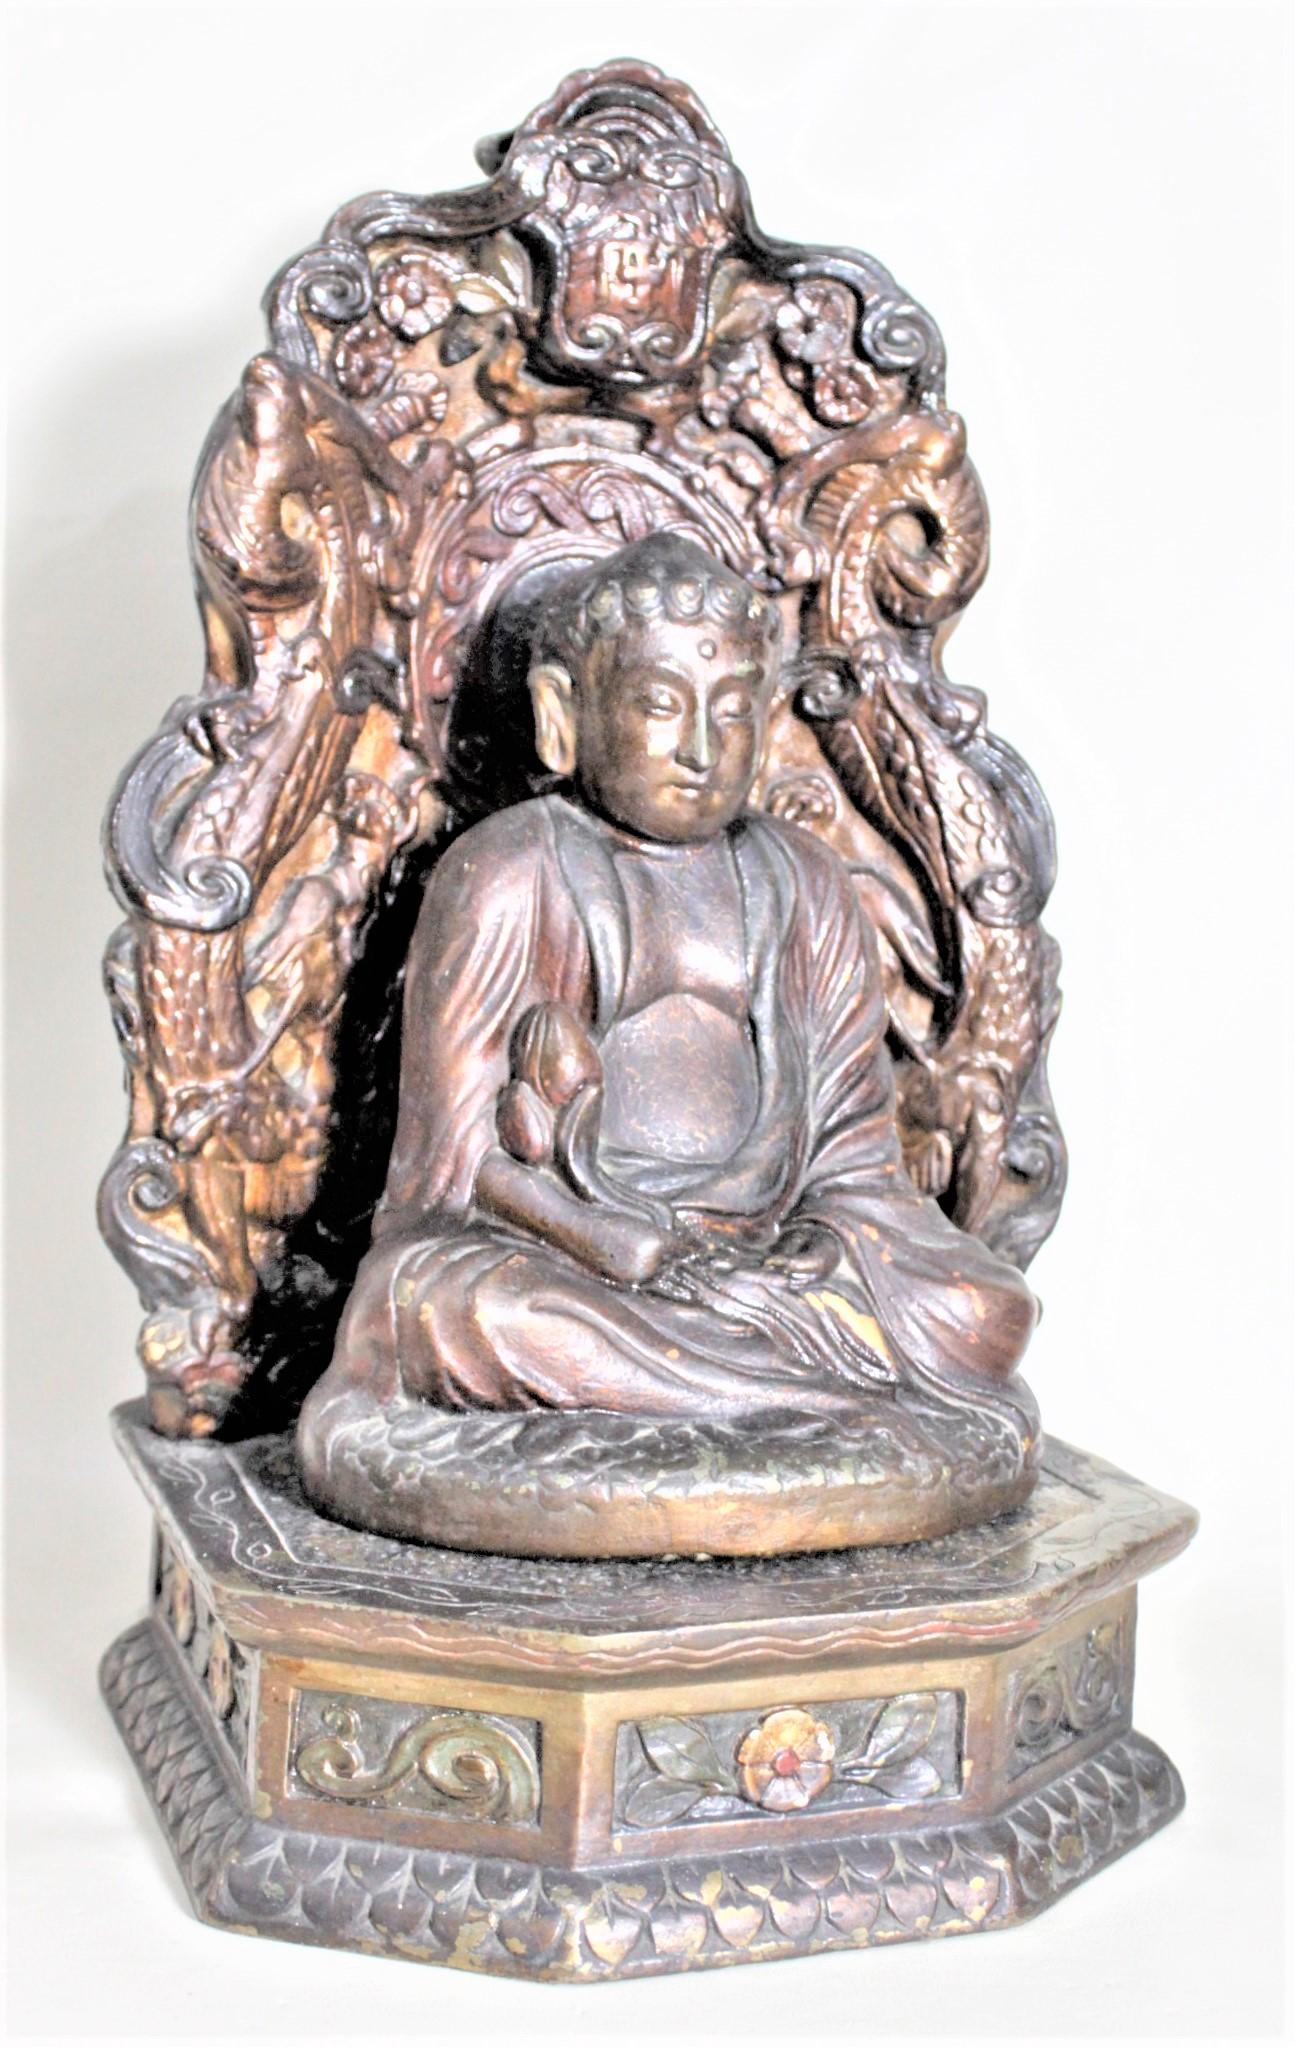 This antique cast and dipped bronze Buddha sculpture and stand is signed by and unknown maker, and presumed to have been made in China in approximately 1920. Both the ornate stand and Buddha sculpture are composed of a plaster which has been bronze